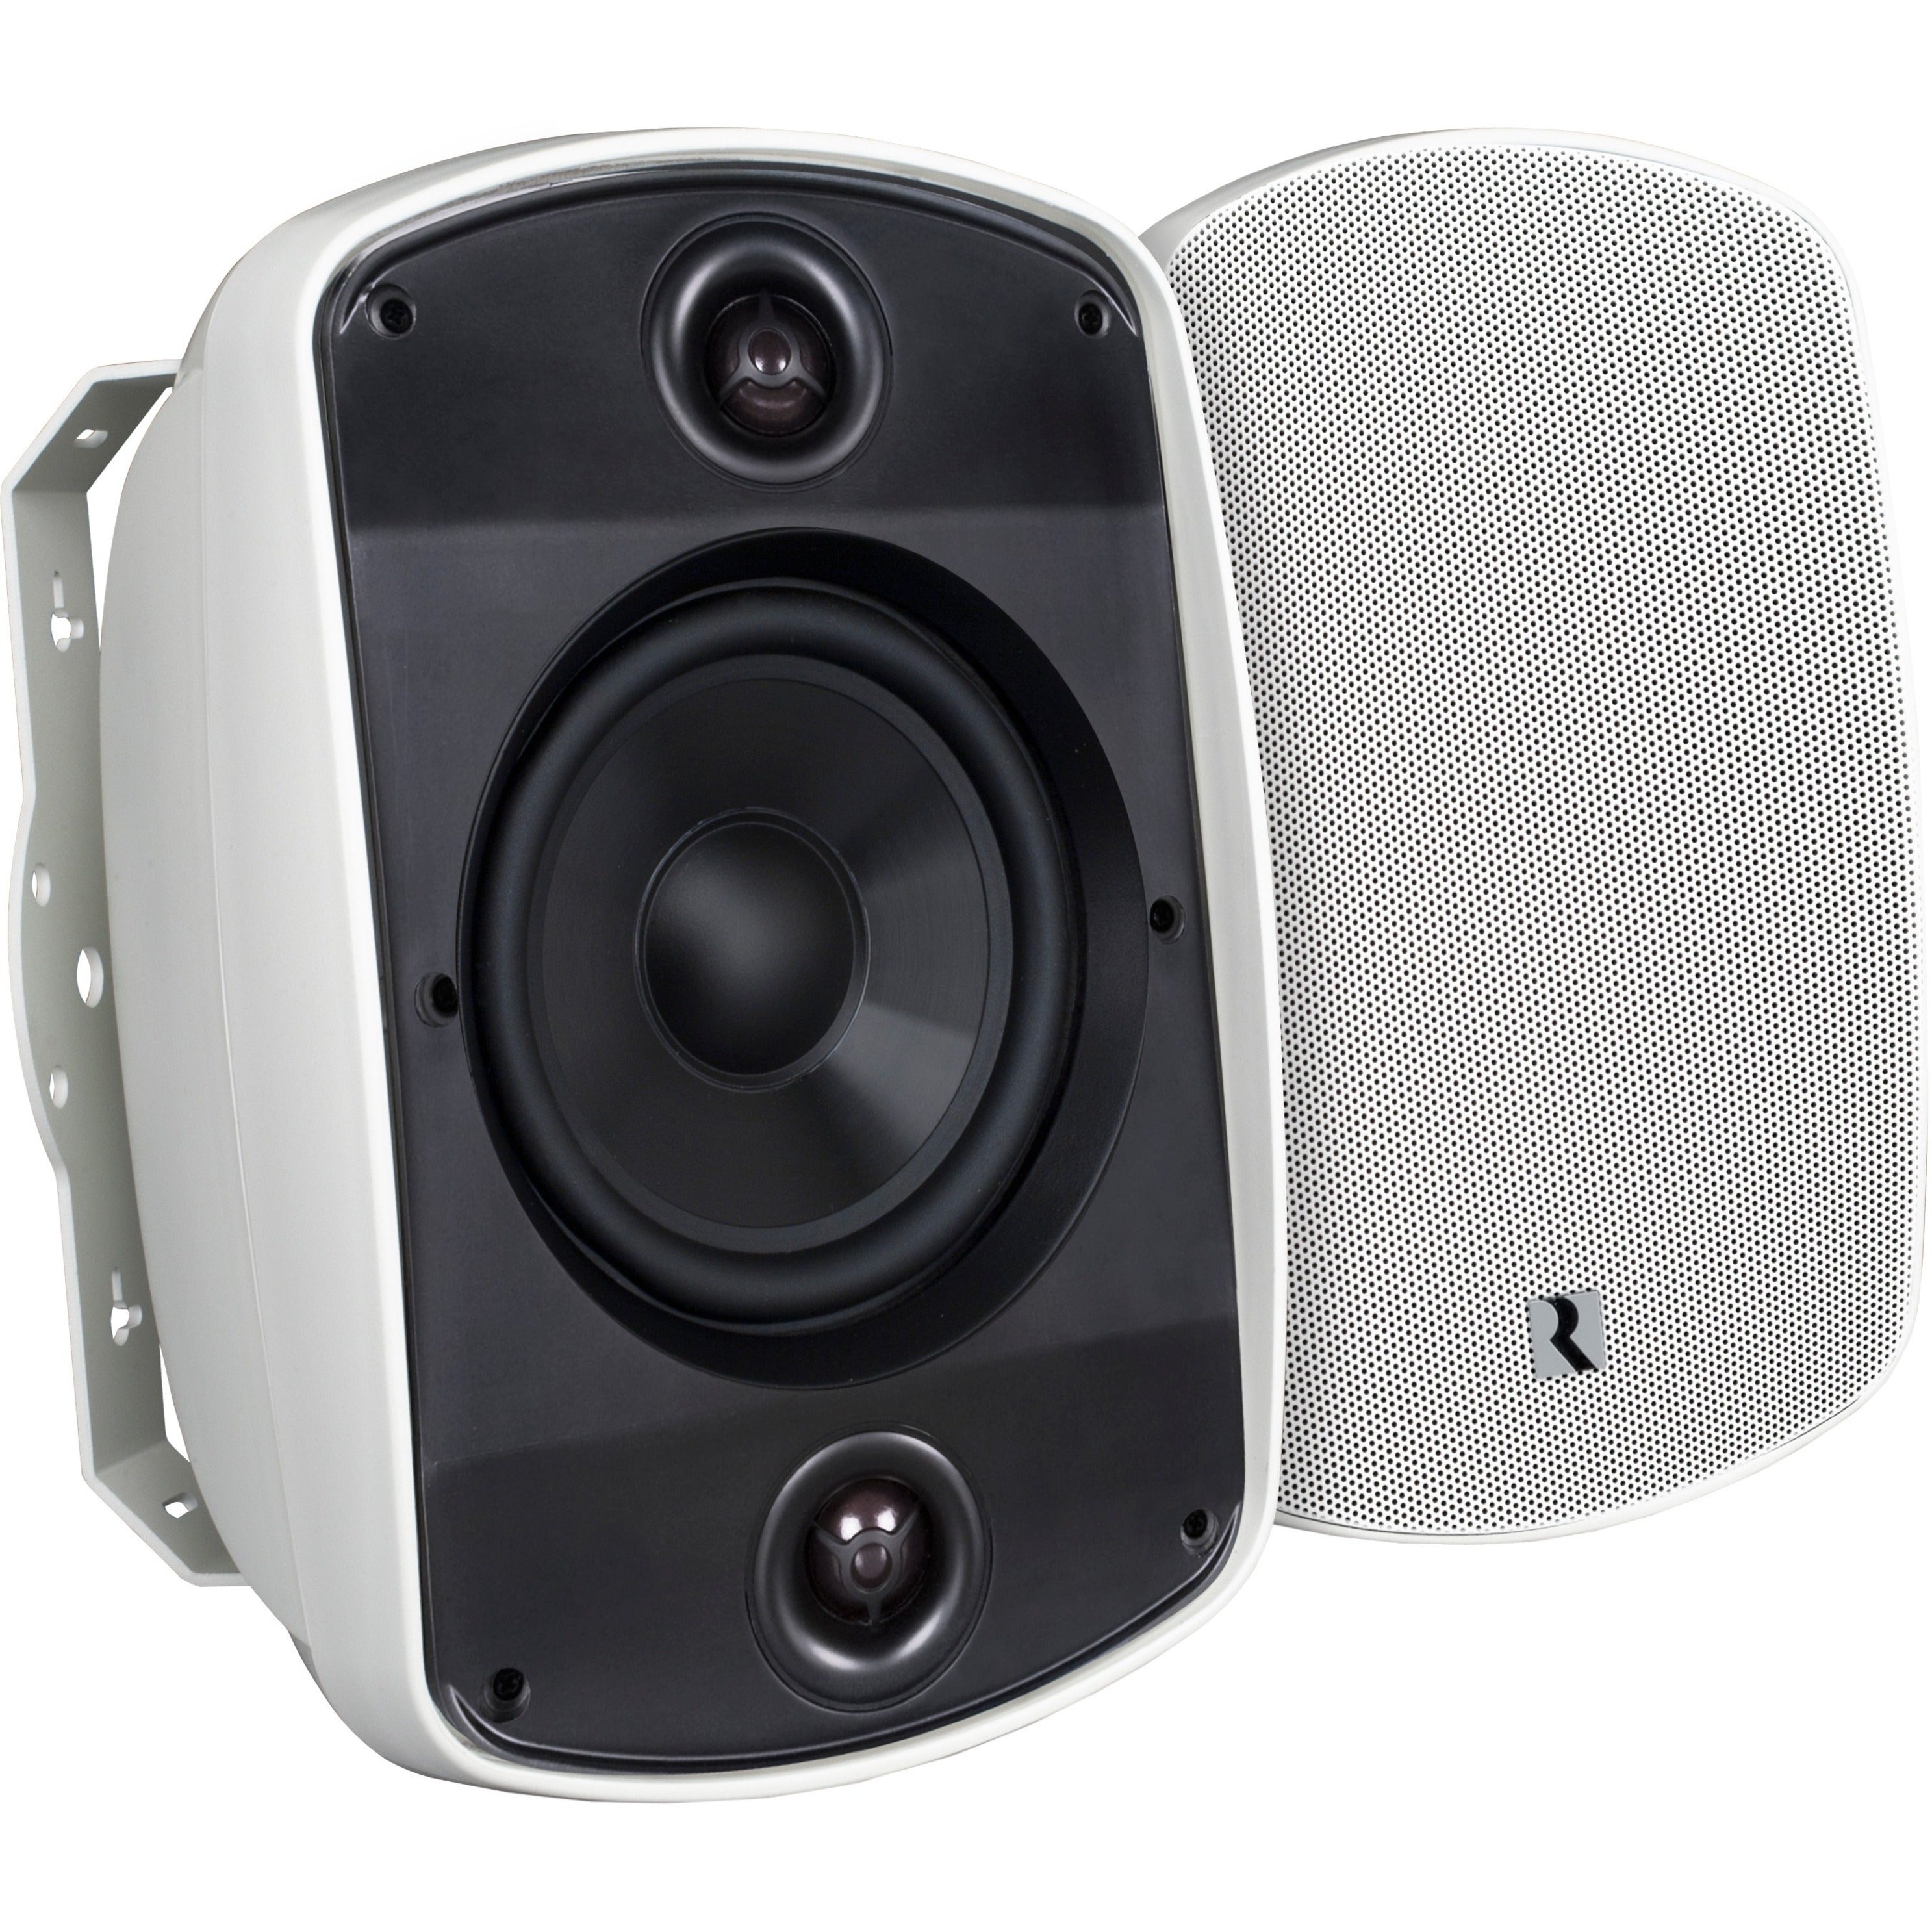 Russound 5B65SMK2-W Acclaim 6.5 OutBack Single Point Stereo Speaker in White, 150W RMS Output Power, Weather Resistant